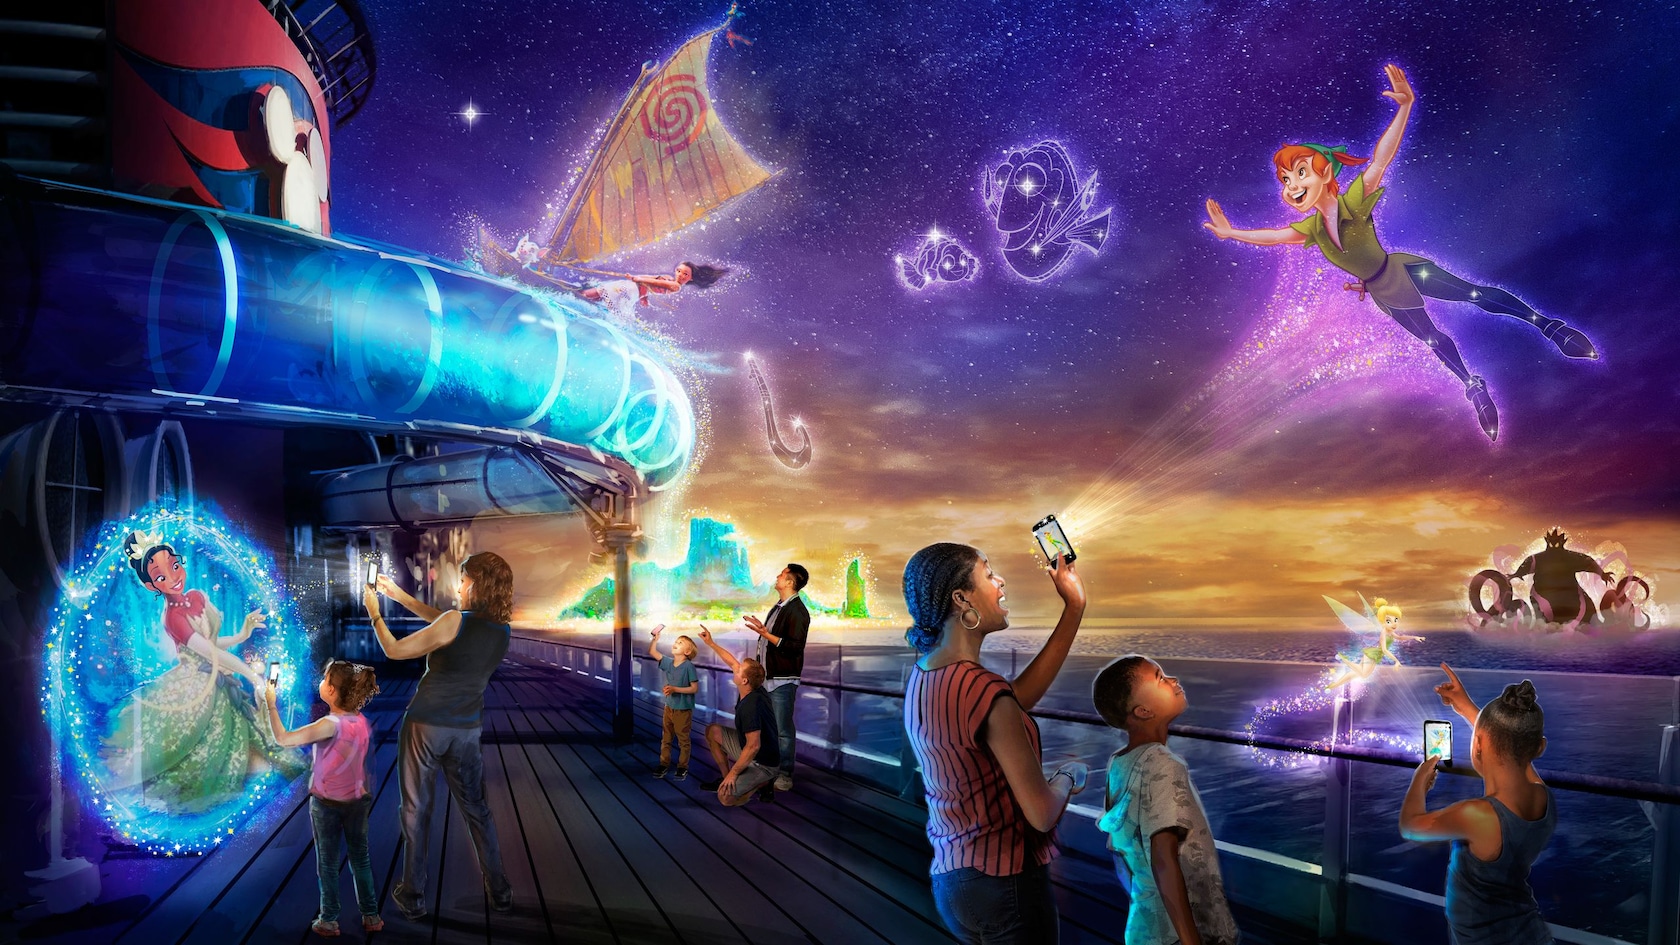 Families holding up phones on the deck of a Disney cruise ship with images of Disney characters in the sky